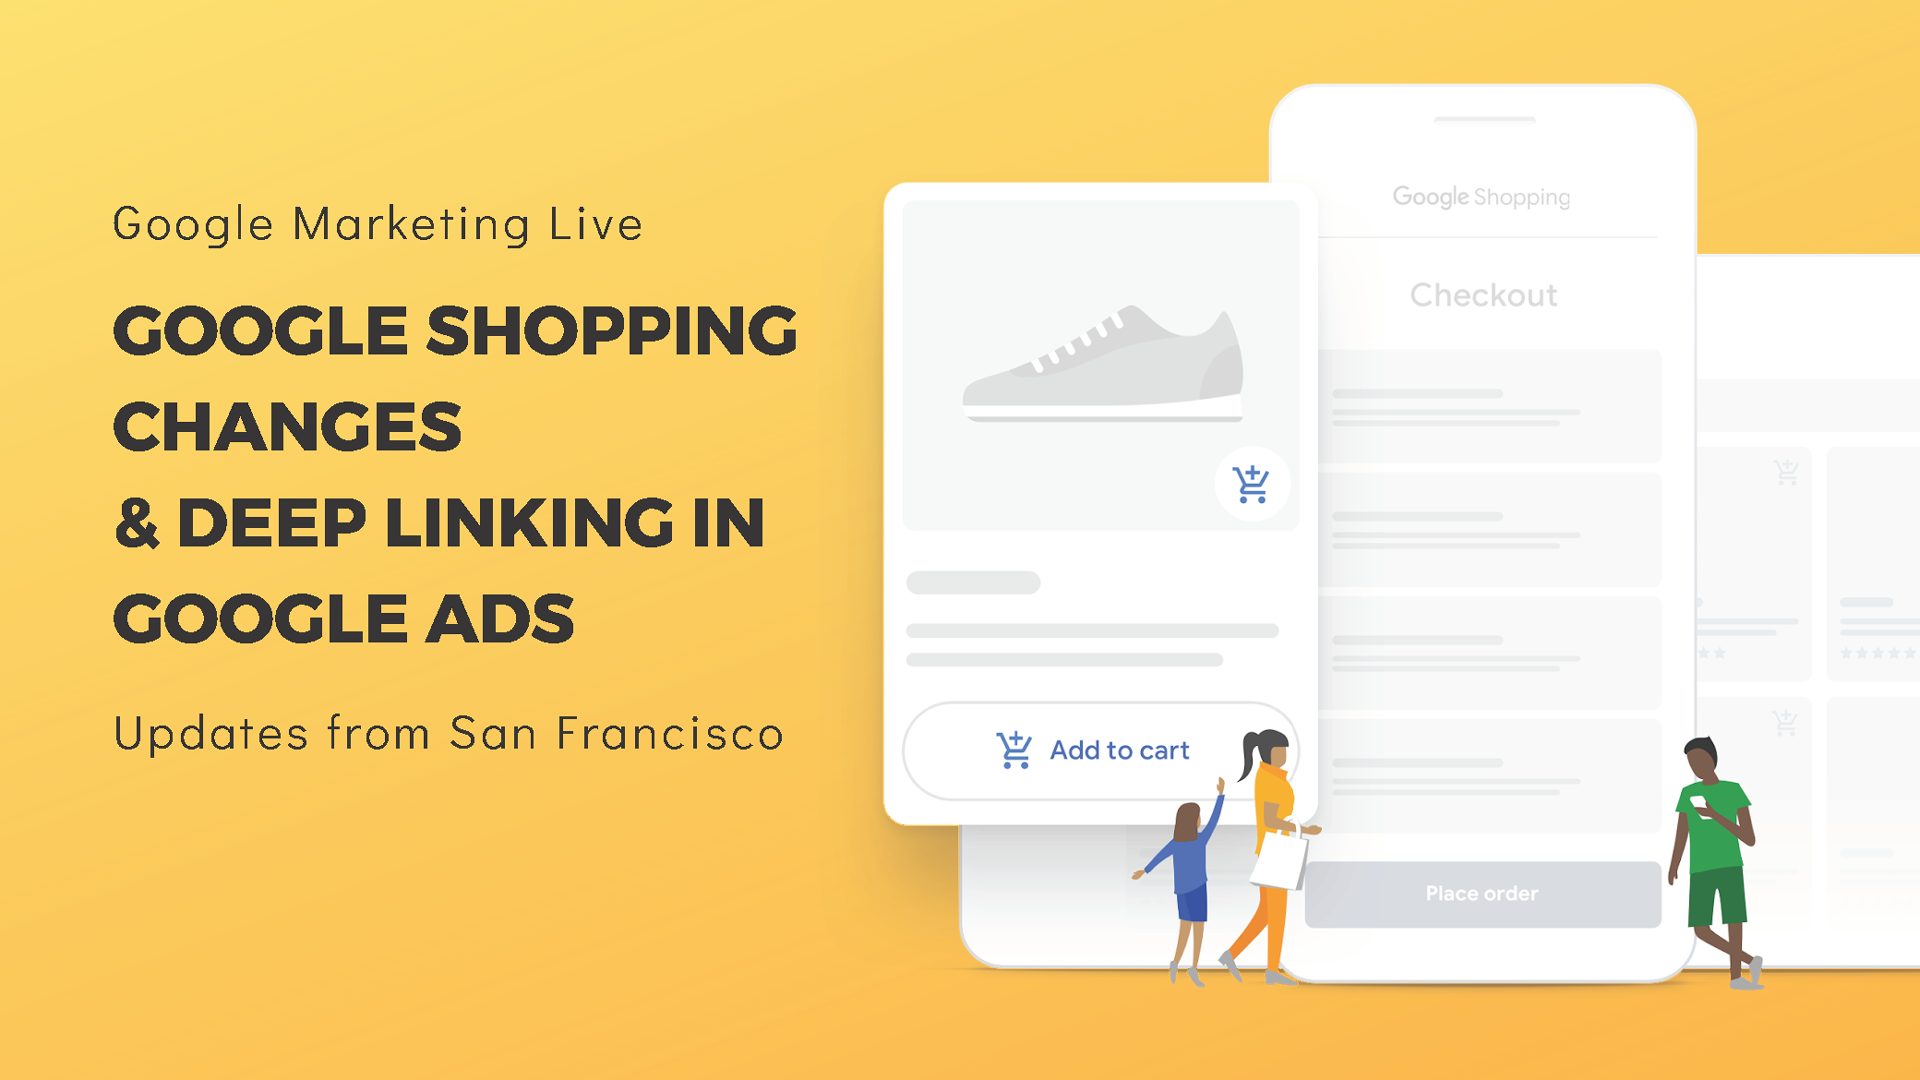 New Google Shopping Changes and Deep Linking in Google Ads